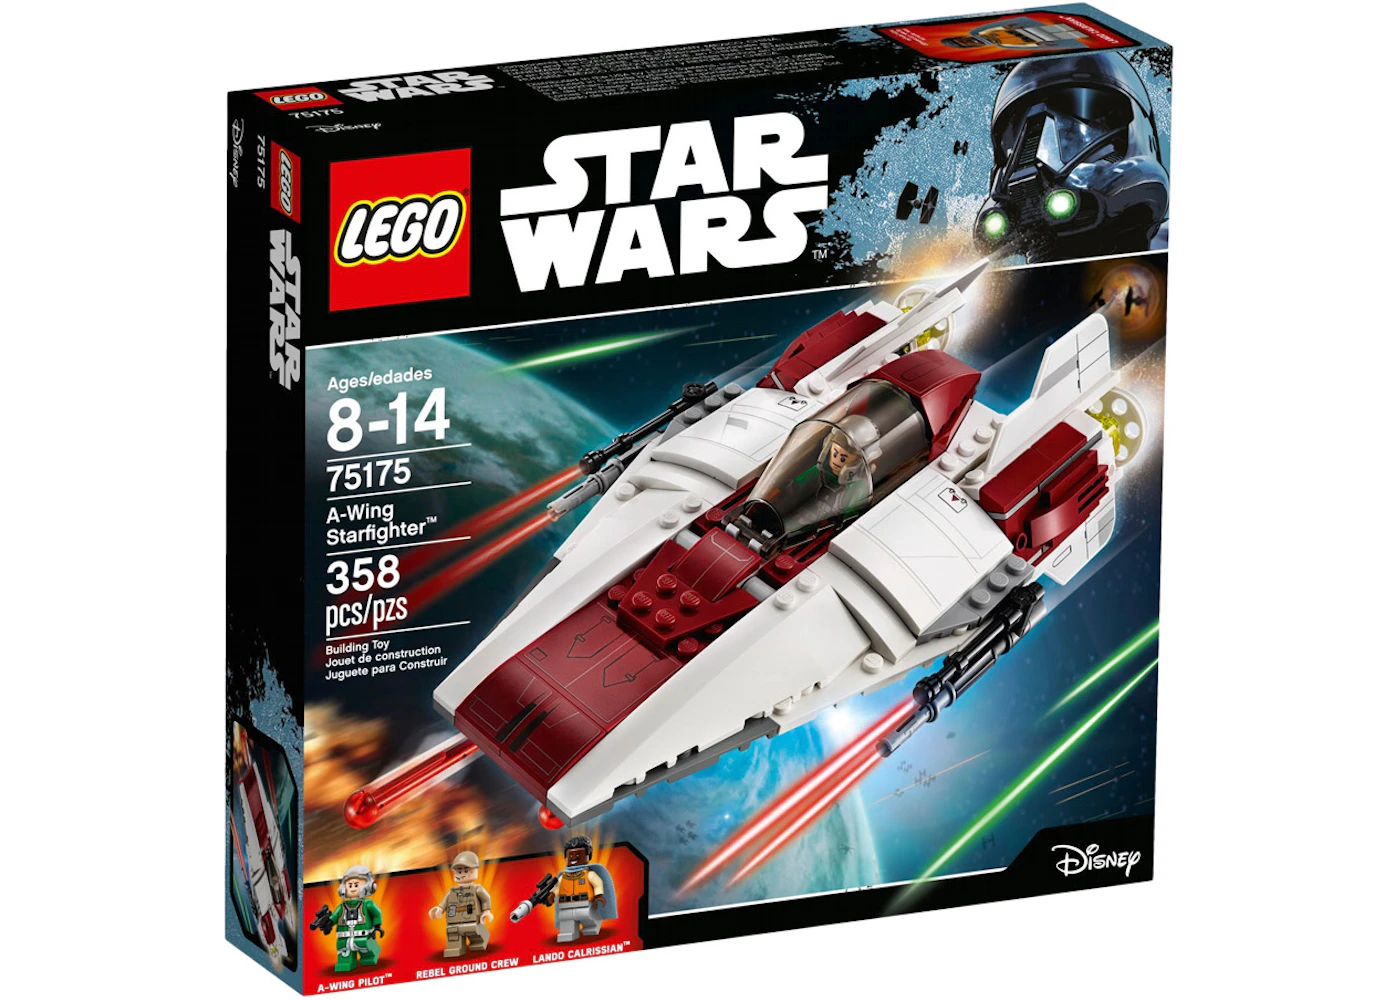 LEGO Wars A-wing Starfighter Set 75175 -